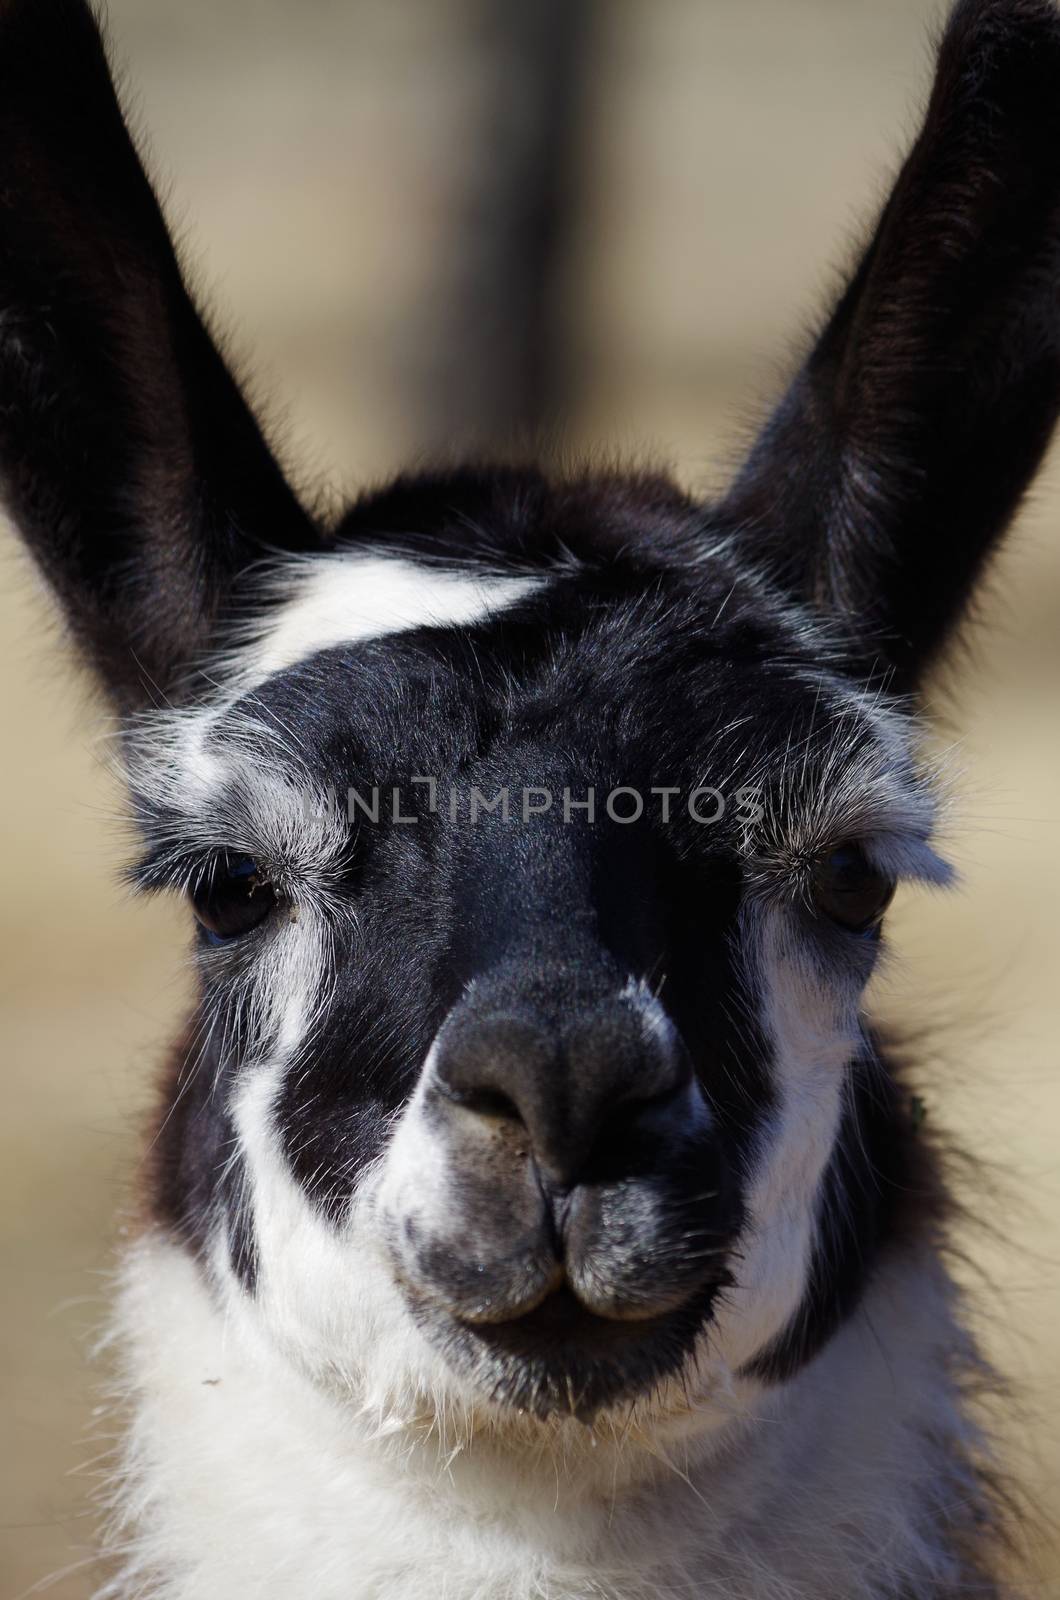 Jethro the Llama Watches Viewer Intently by zfirefly7